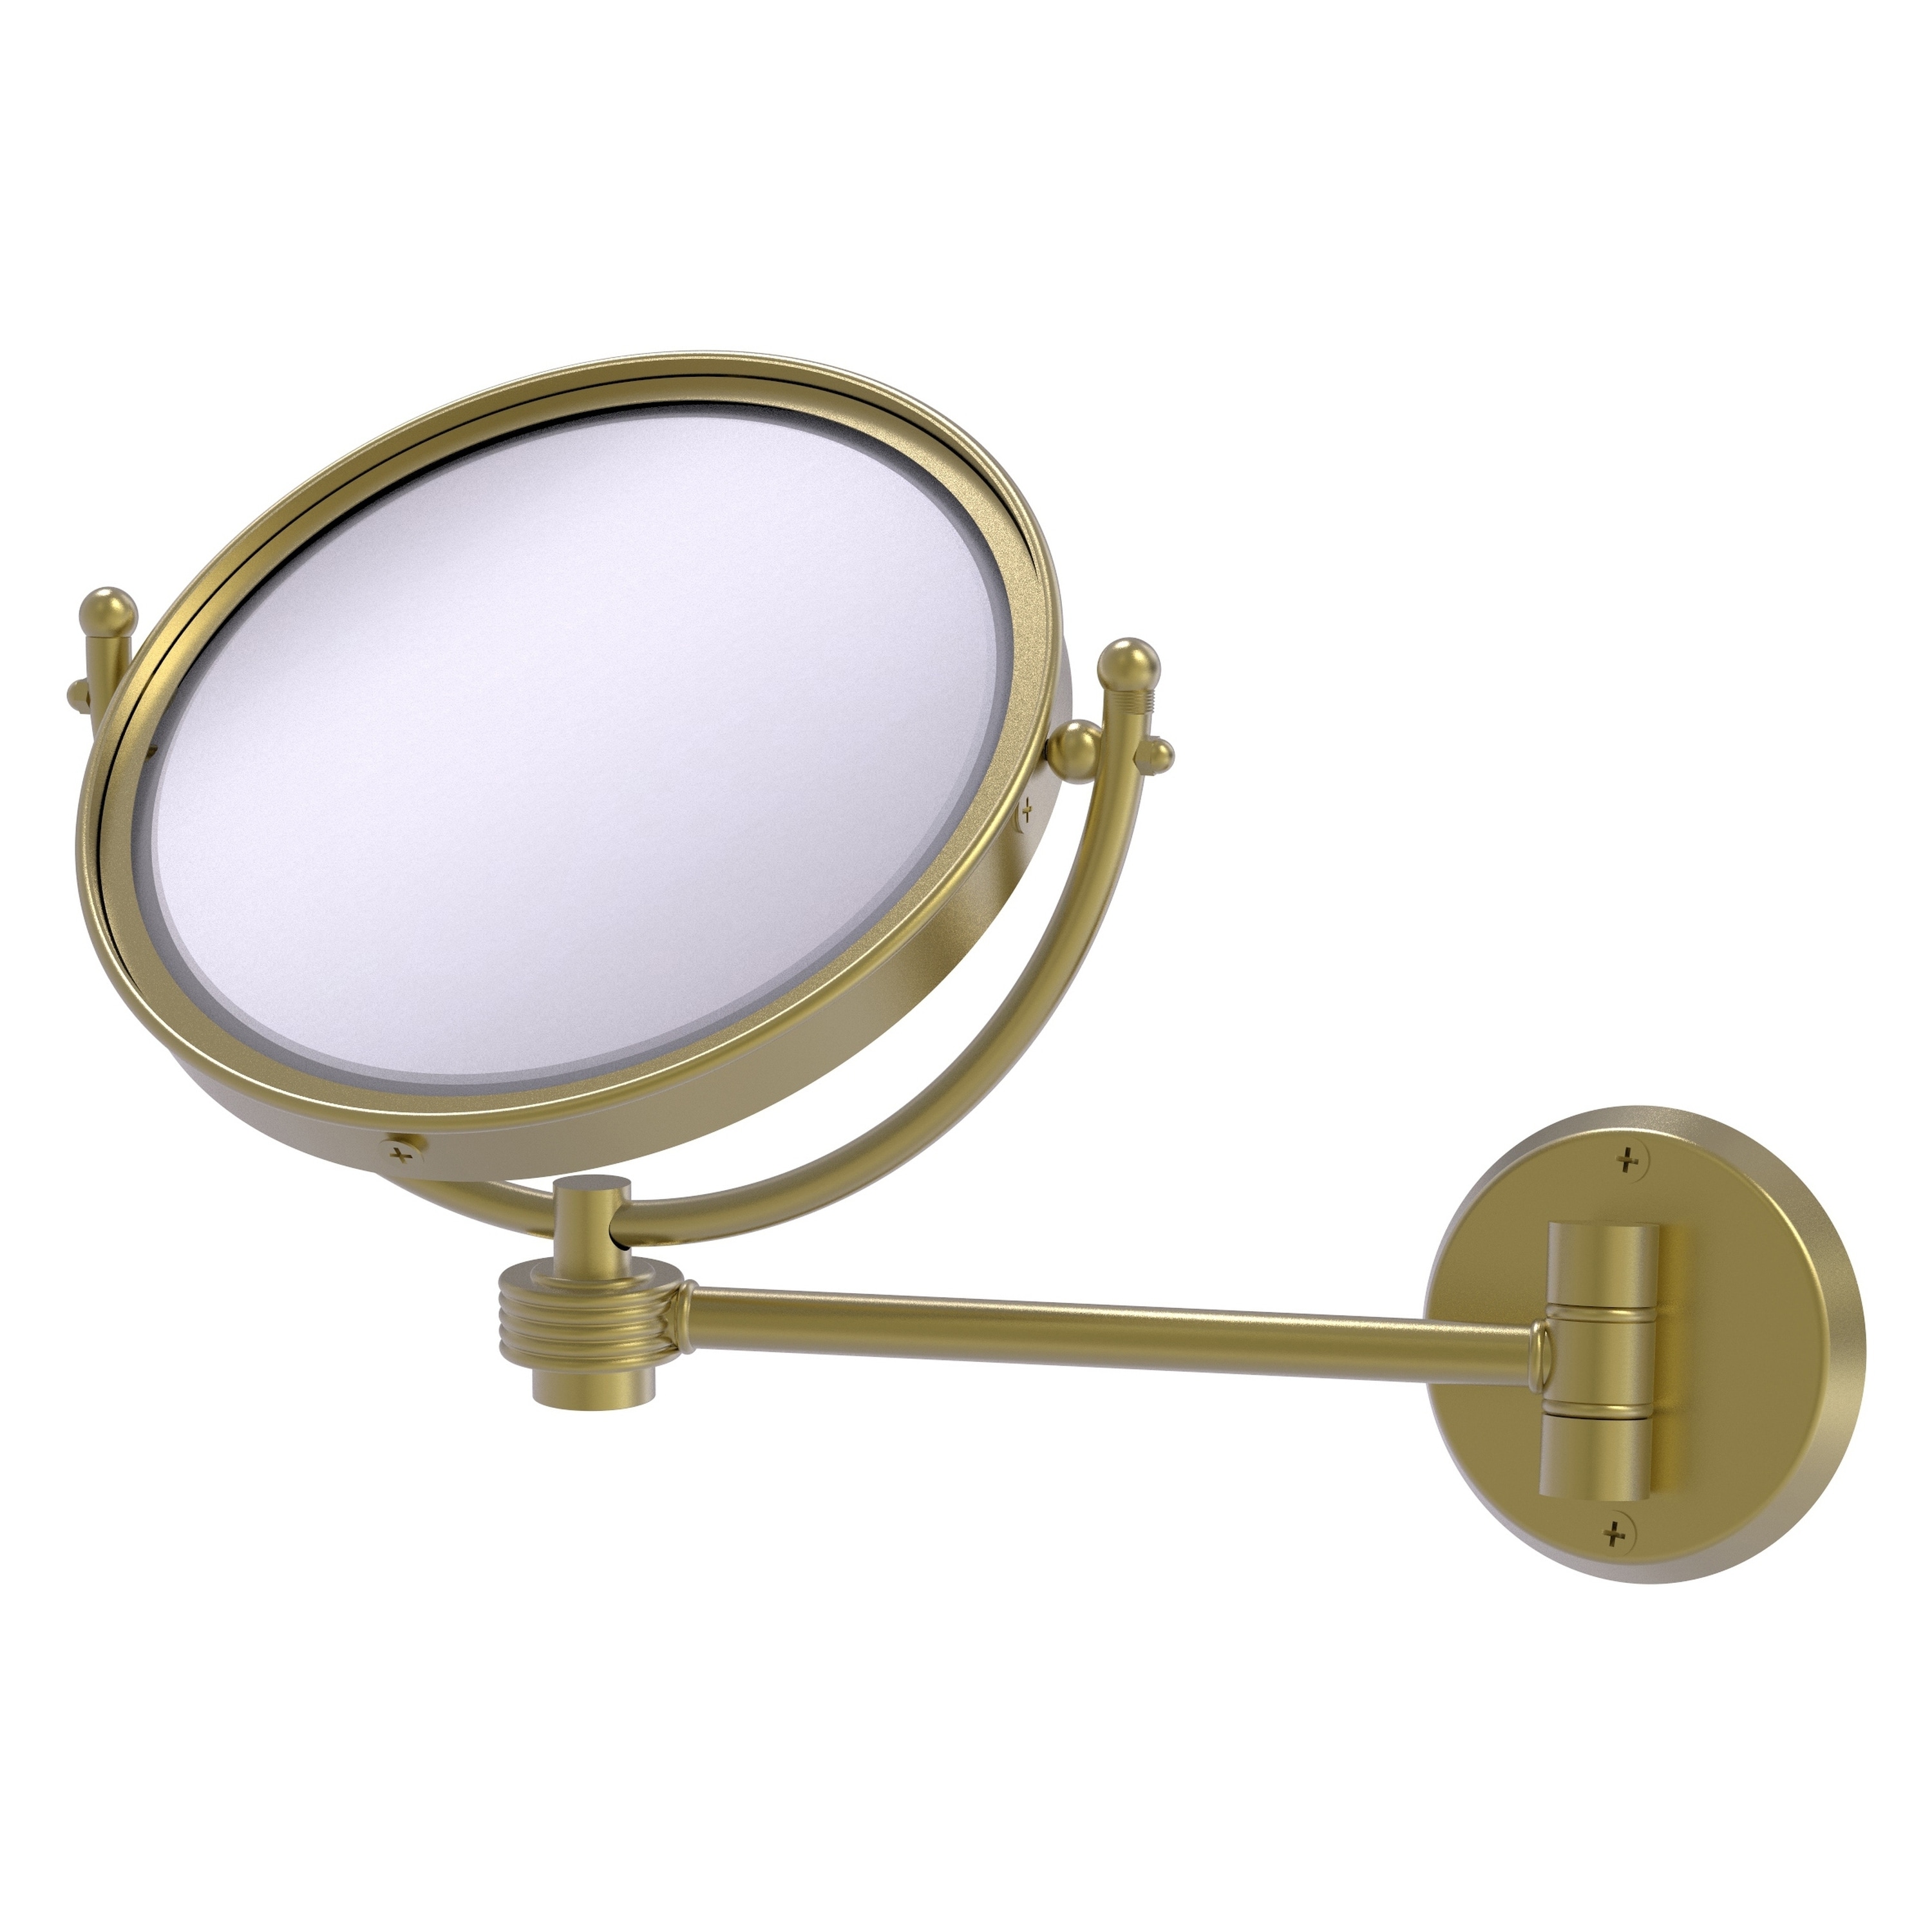 8-in x 10-in Satin Chrome Double-sided 5X Magnifying Wall-mounted Vanity Mirror | - Allied Brass WM-5G/5X-SBR